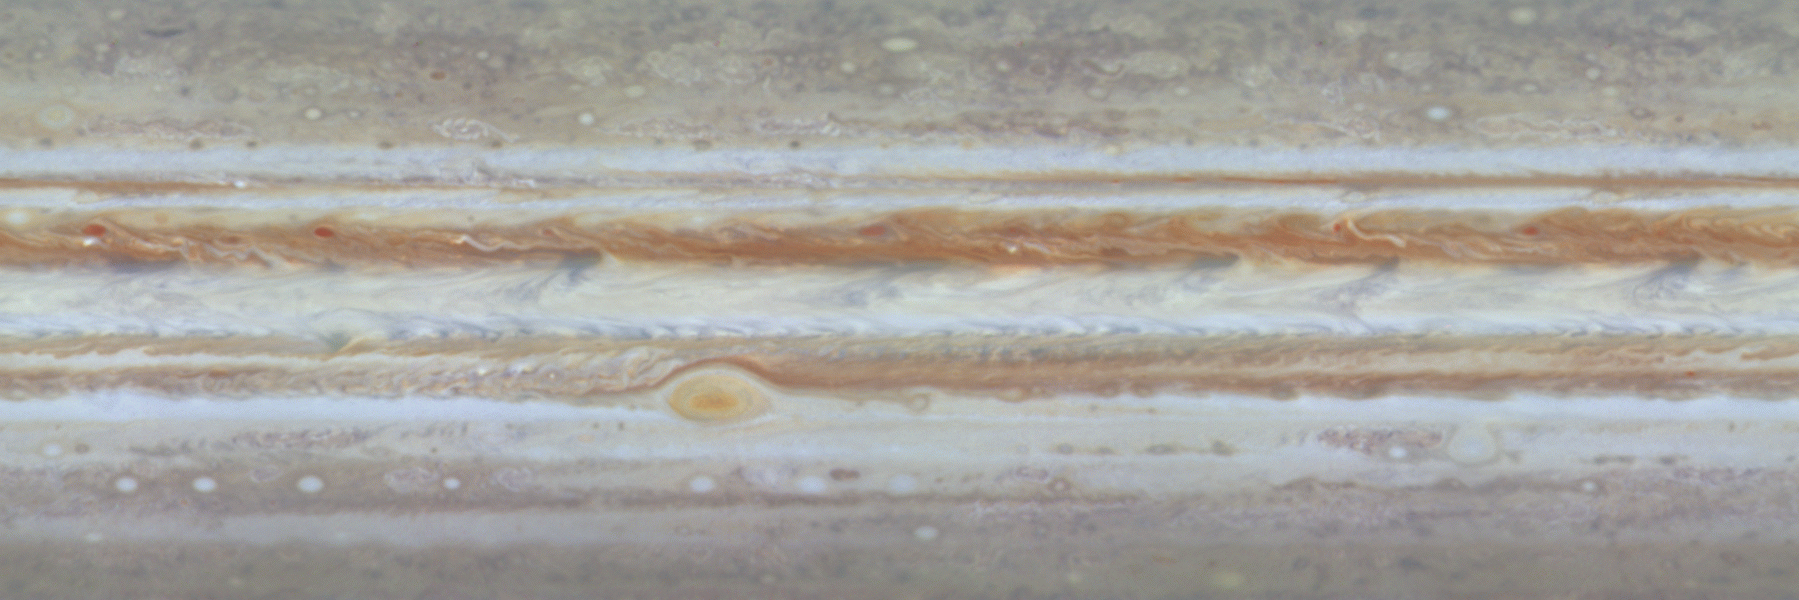 The first color movie of Jupiter from NASA's Cassini spacecraft shows what it would look like to peel the entire globe of Jupiter, stretch it out on a wall into the form of a rectangular map, and watch its atmosphere evolve with time. Credit: NASA/JPL/University of Arizona